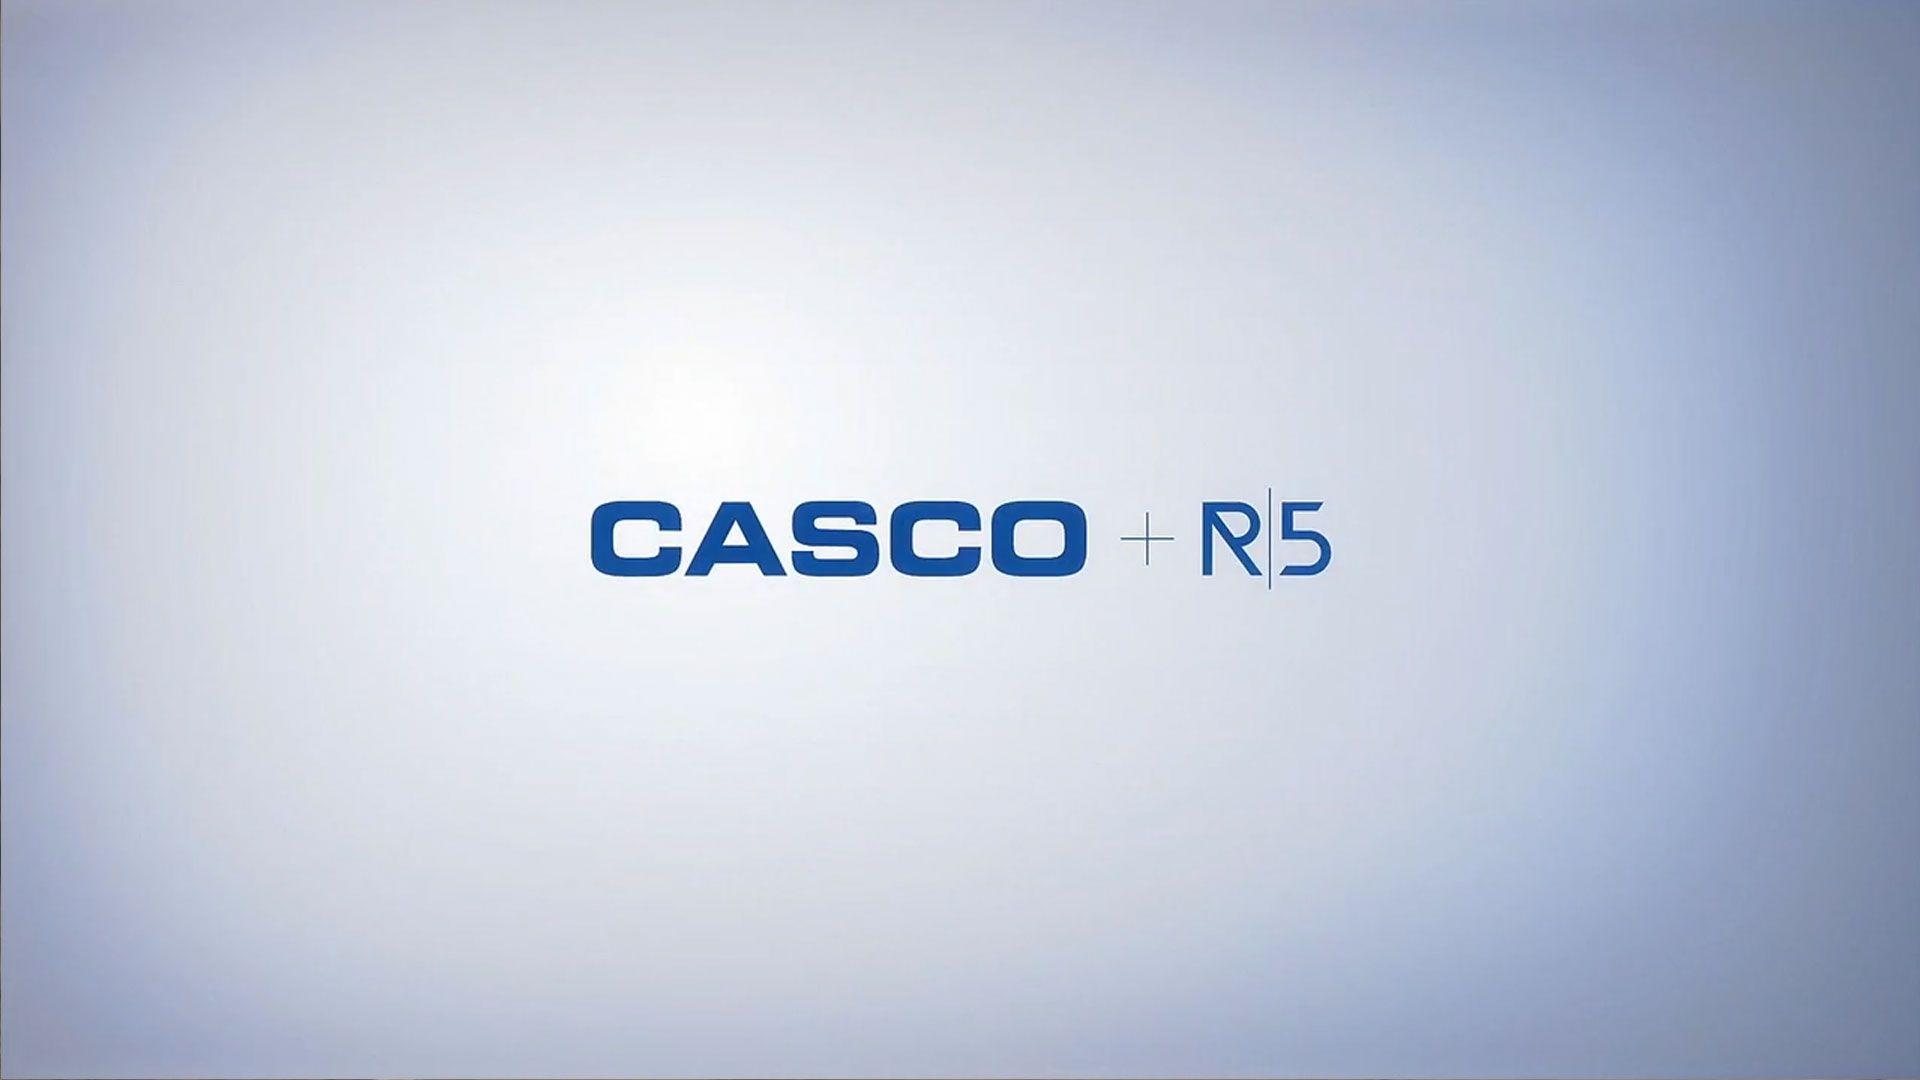 Casco Logo - CASCO + R|5 - National Design, Architecture and Engineering ...